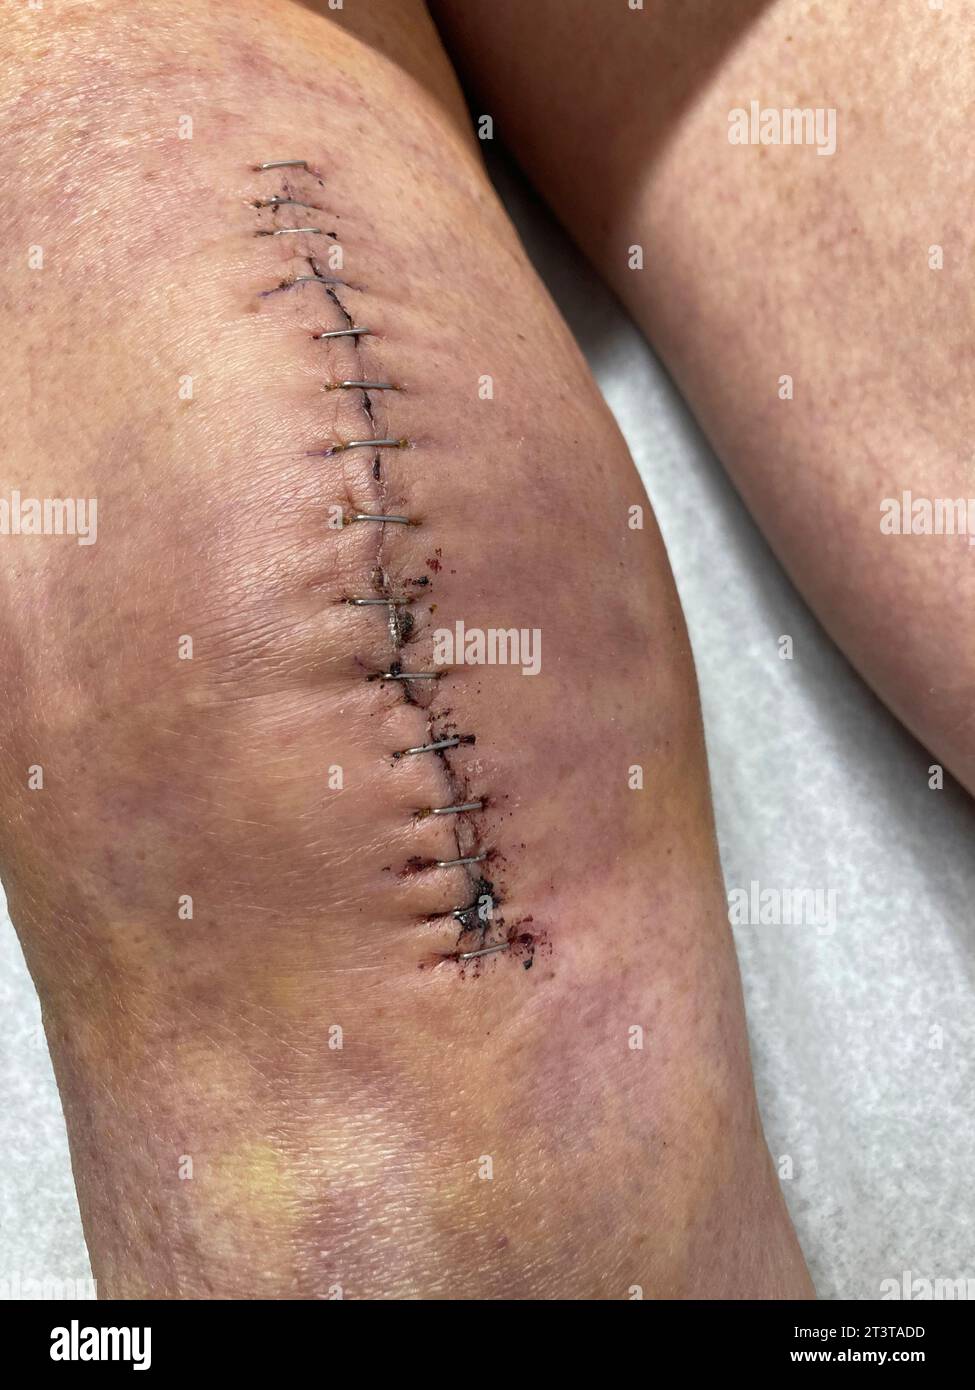 Close-up view of woman with large scar on knee after surgery Stock Photo